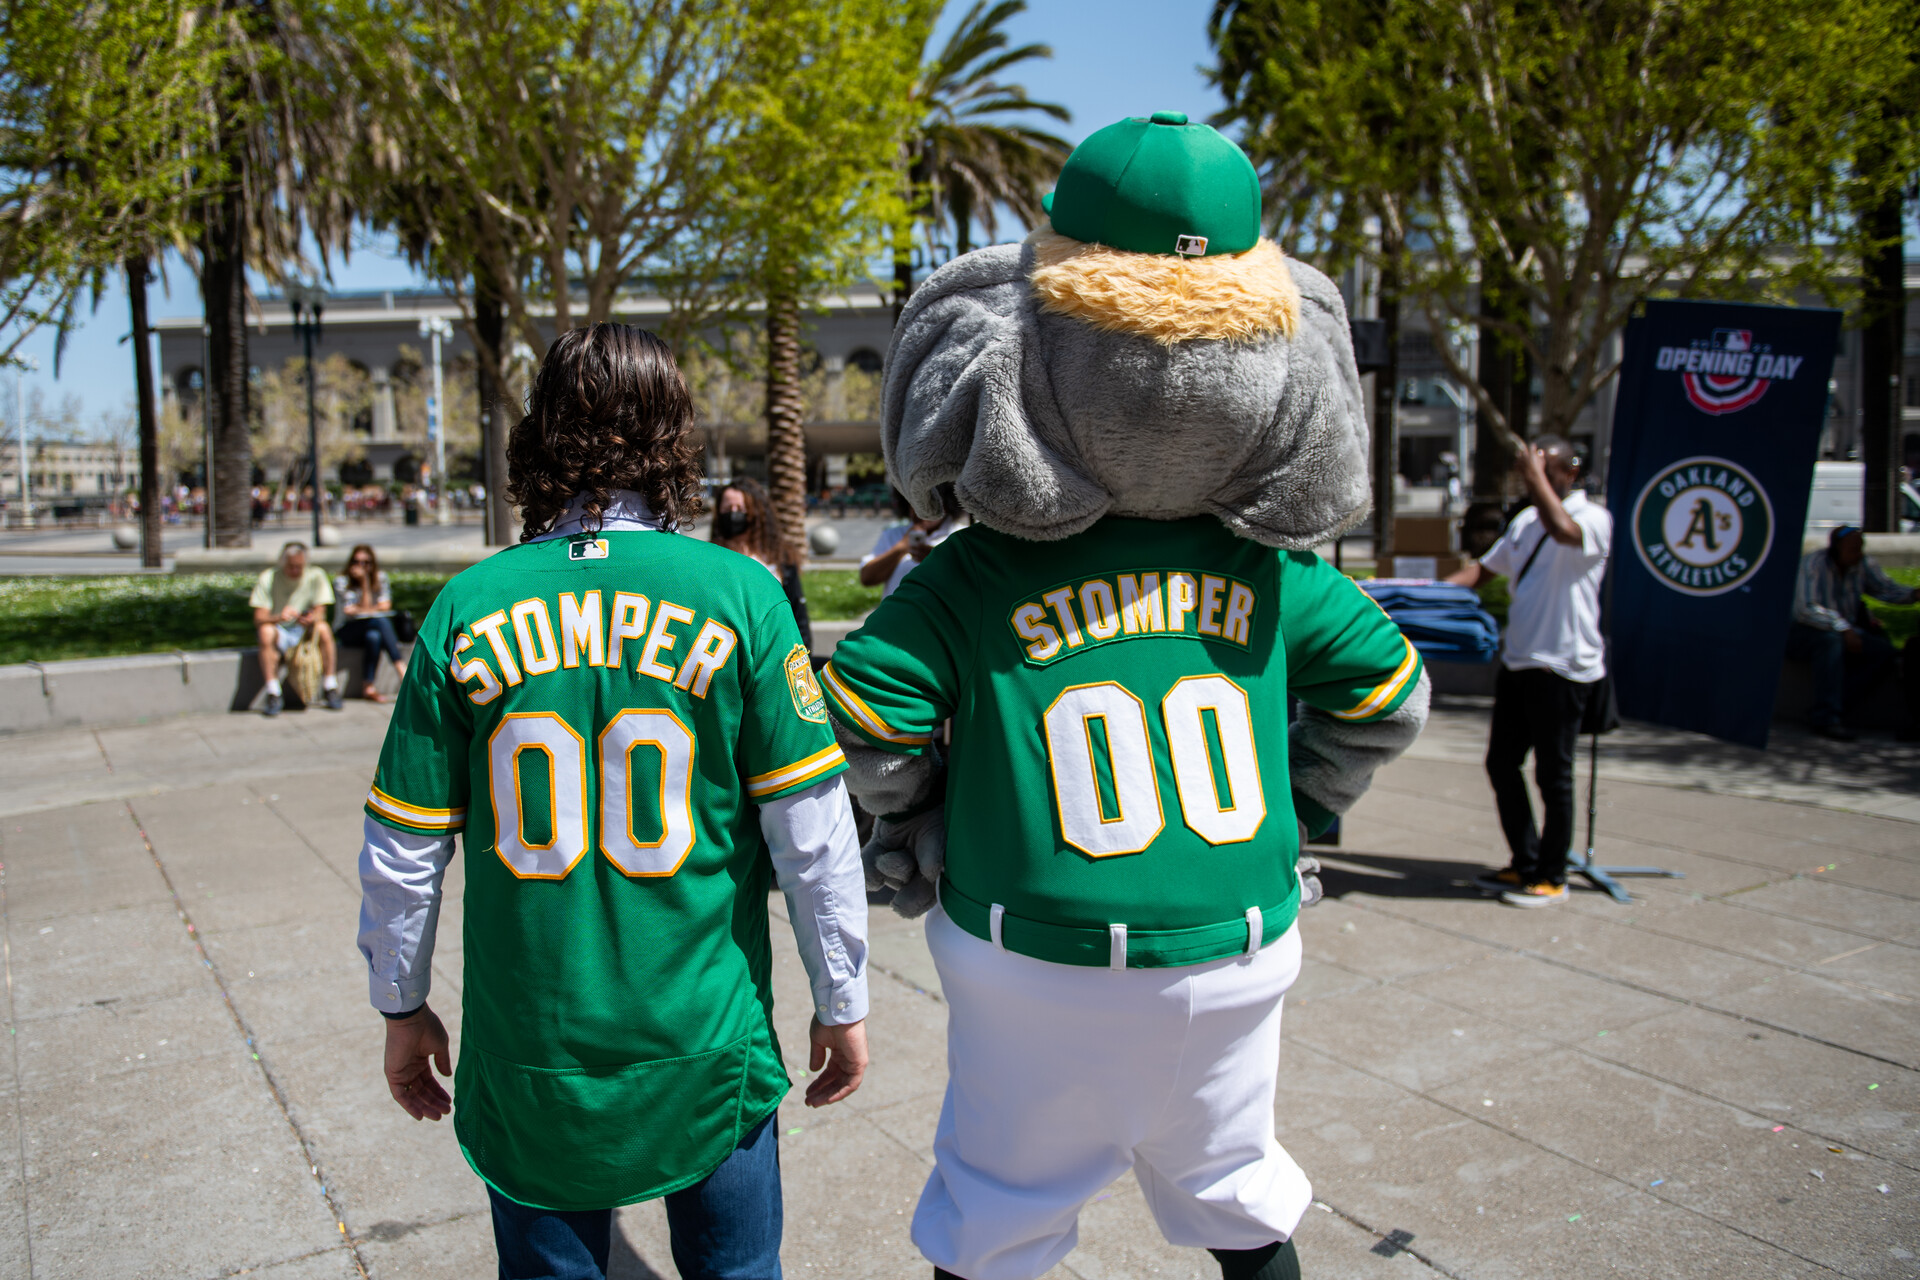 An Oakland Athletics baseball fan wears the team's green and gold jersey. The fan poses for a photo with their back toward the camera and is standing next to the team's mascot, Stomper, who is wearing a baseball uniform. Stomper is an elephant.